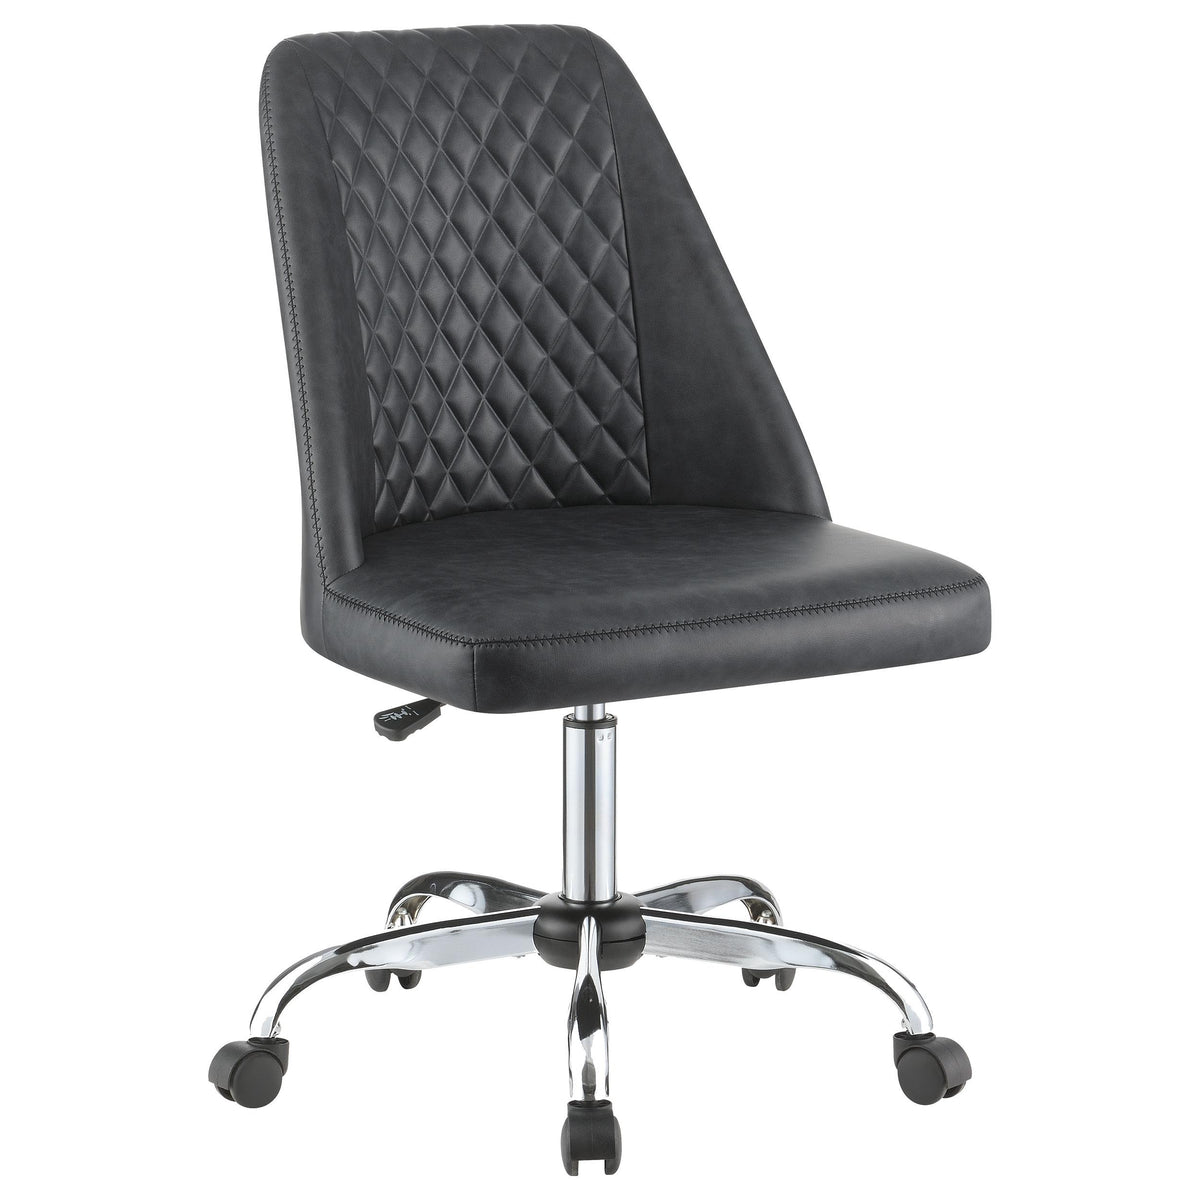 Althea Upholstered Tufted Back Office Chair Grey and Chrome  Las Vegas Furniture Stores